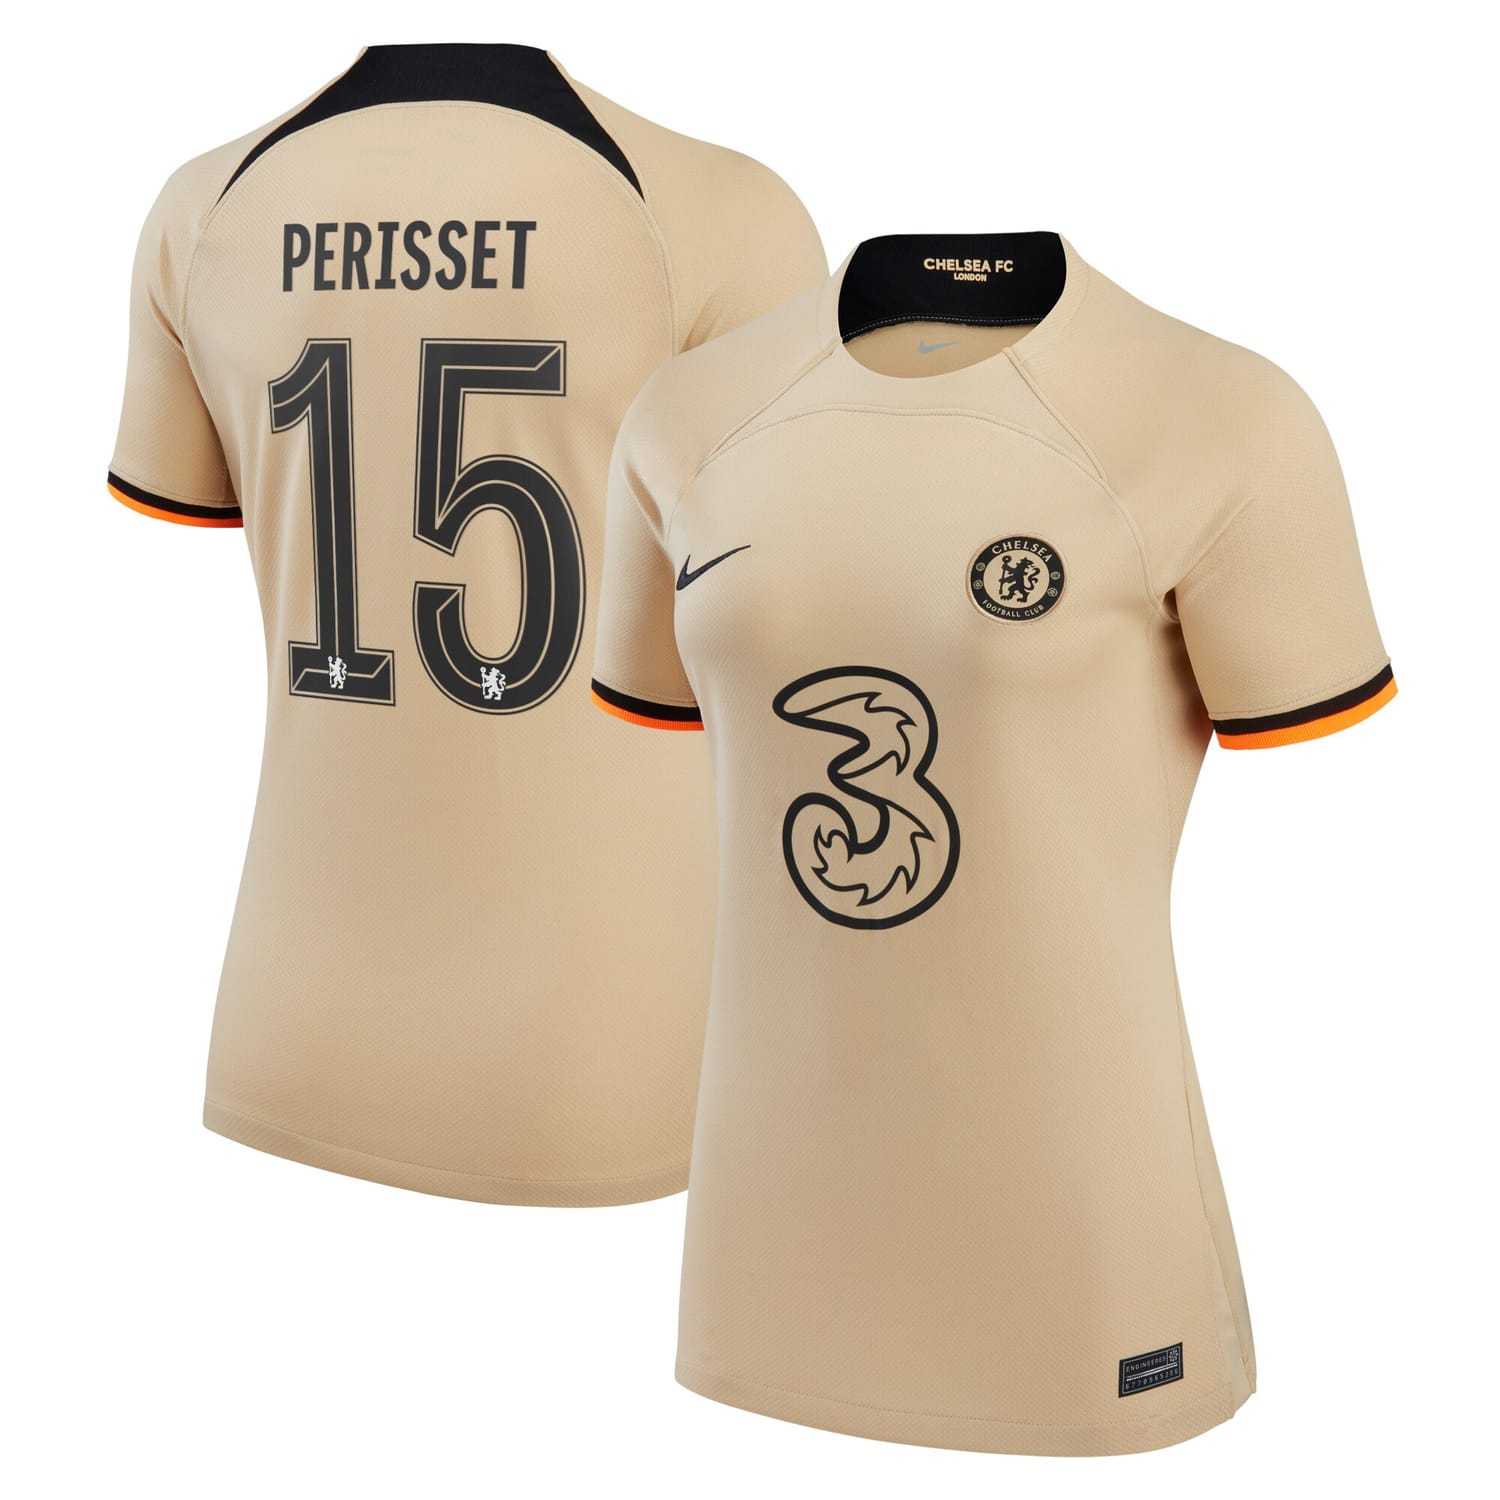 Premier League Chelsea Third Cup Jersey Shirt 2022-23 player Eve Perisset 15 printing for Women